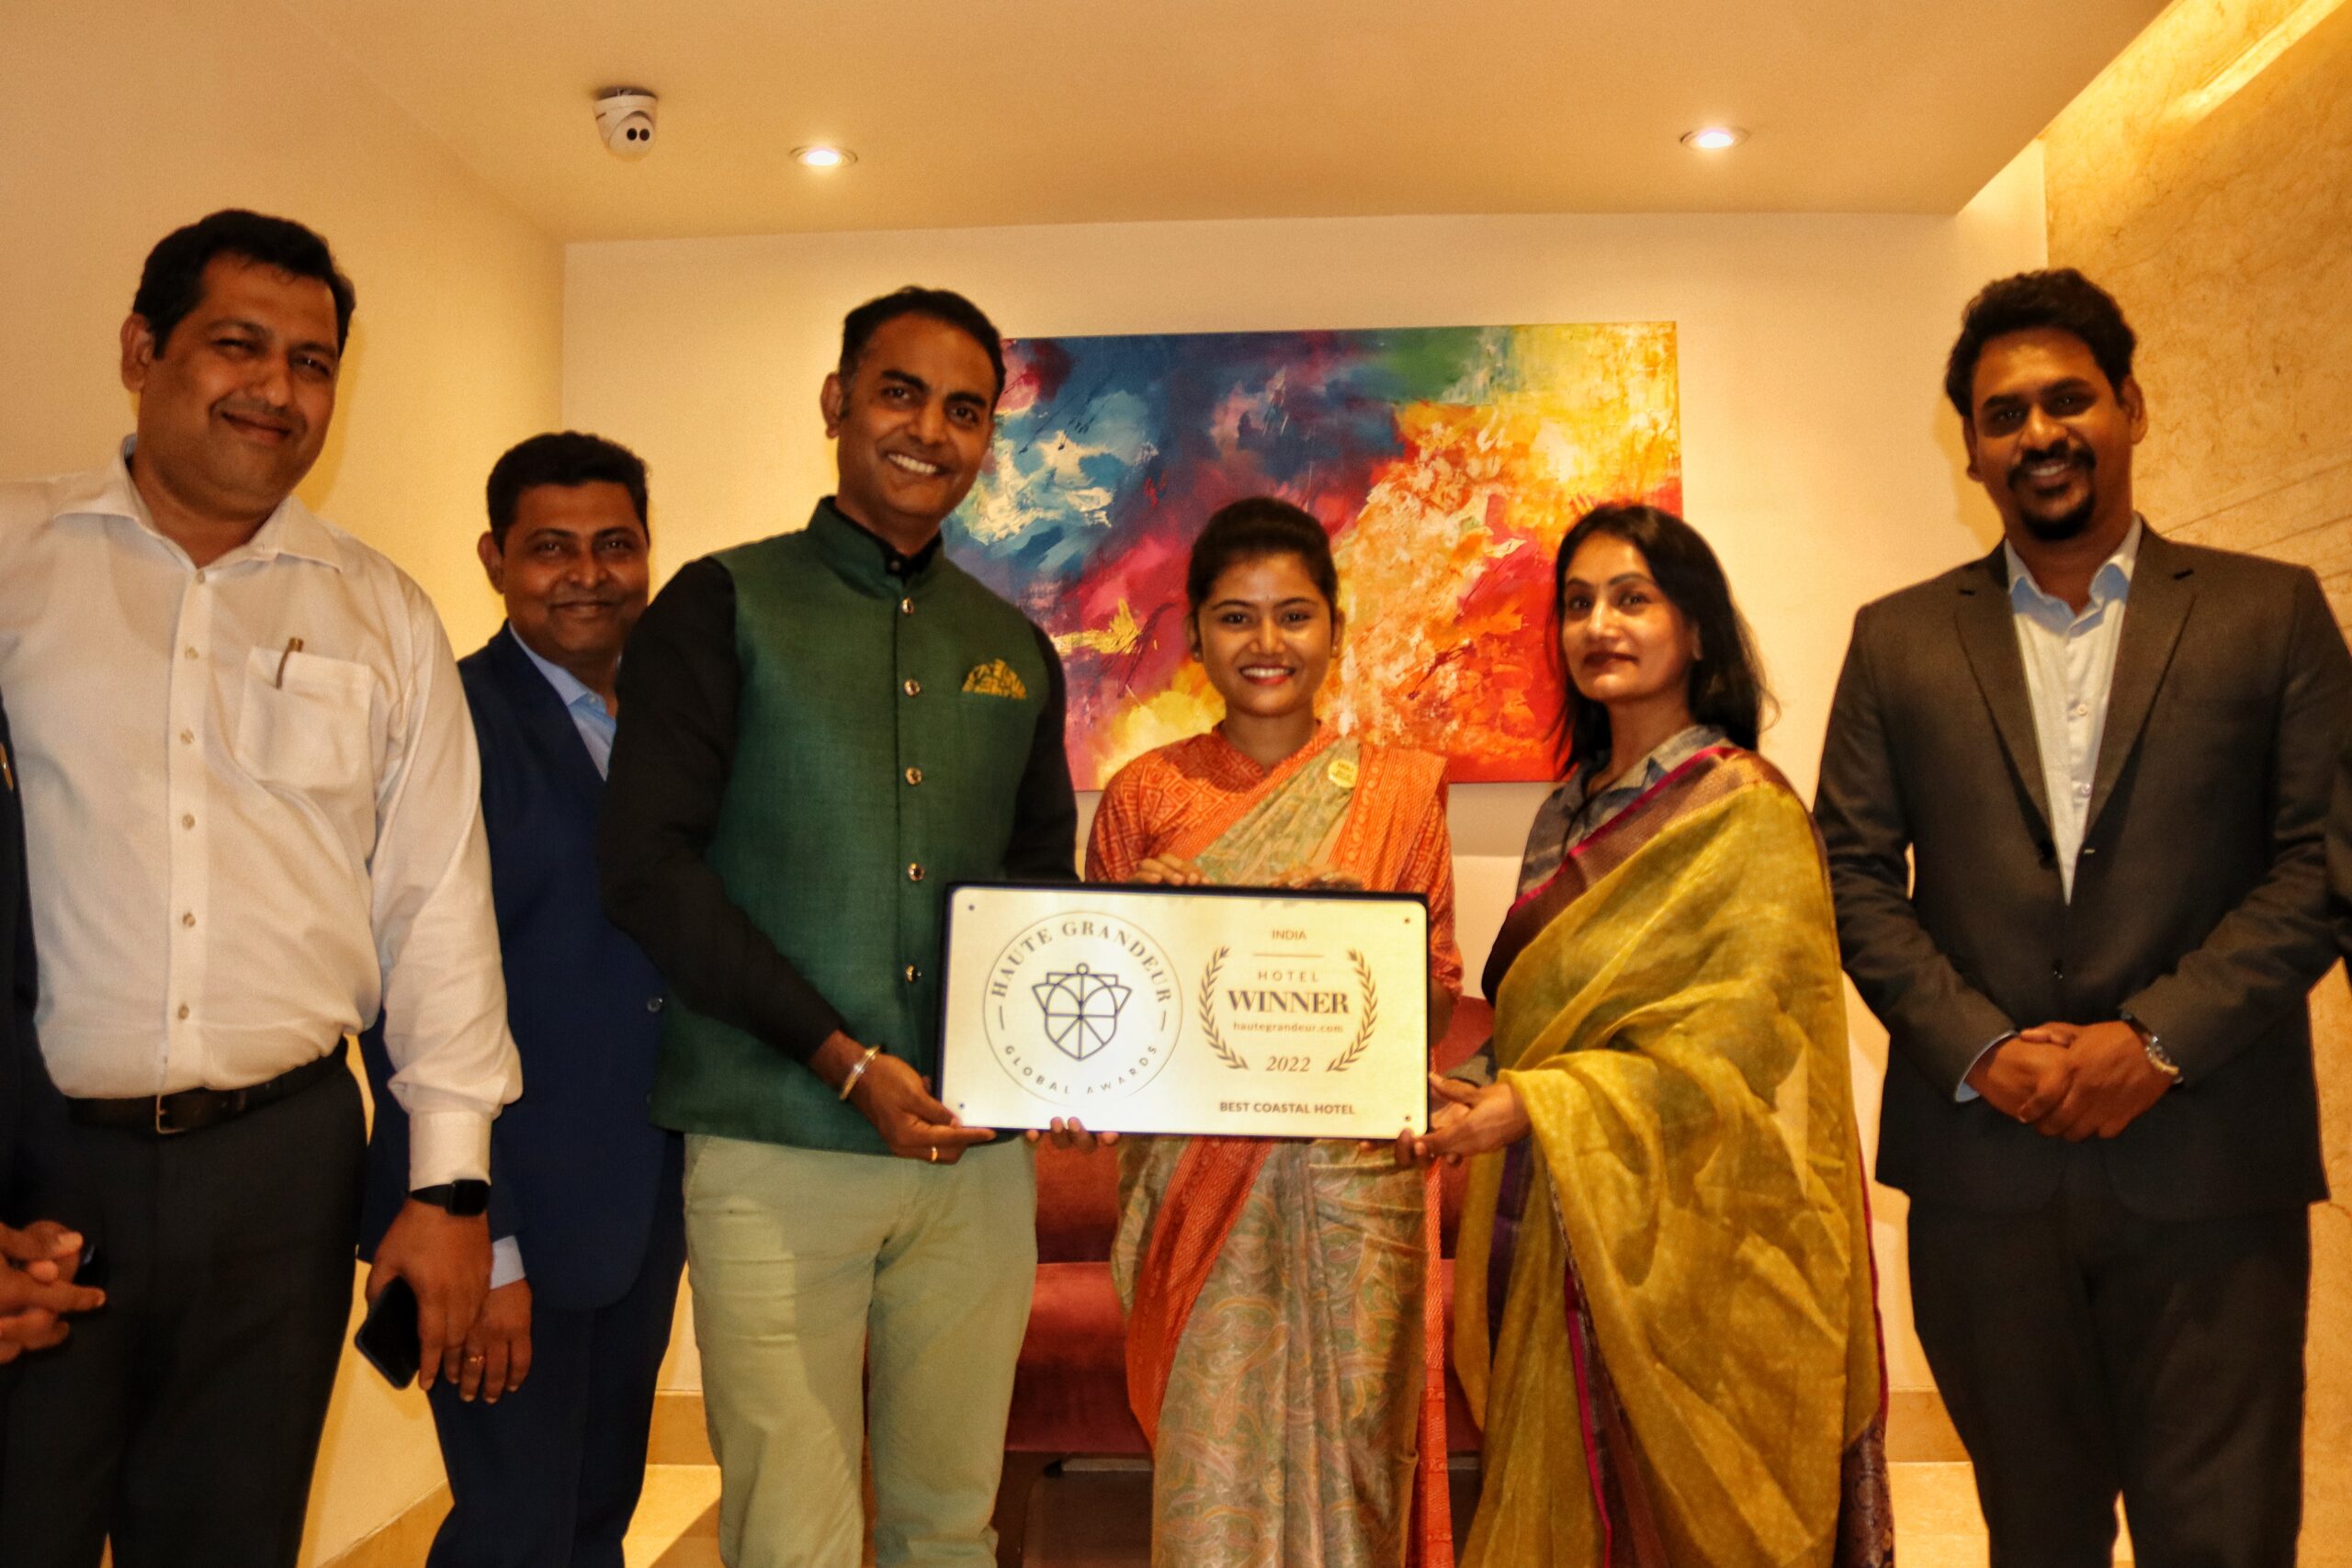 Novotel Visakhapatnam Varun Beach conferred the Excellence Award for “Best Coastal Hotel in India”